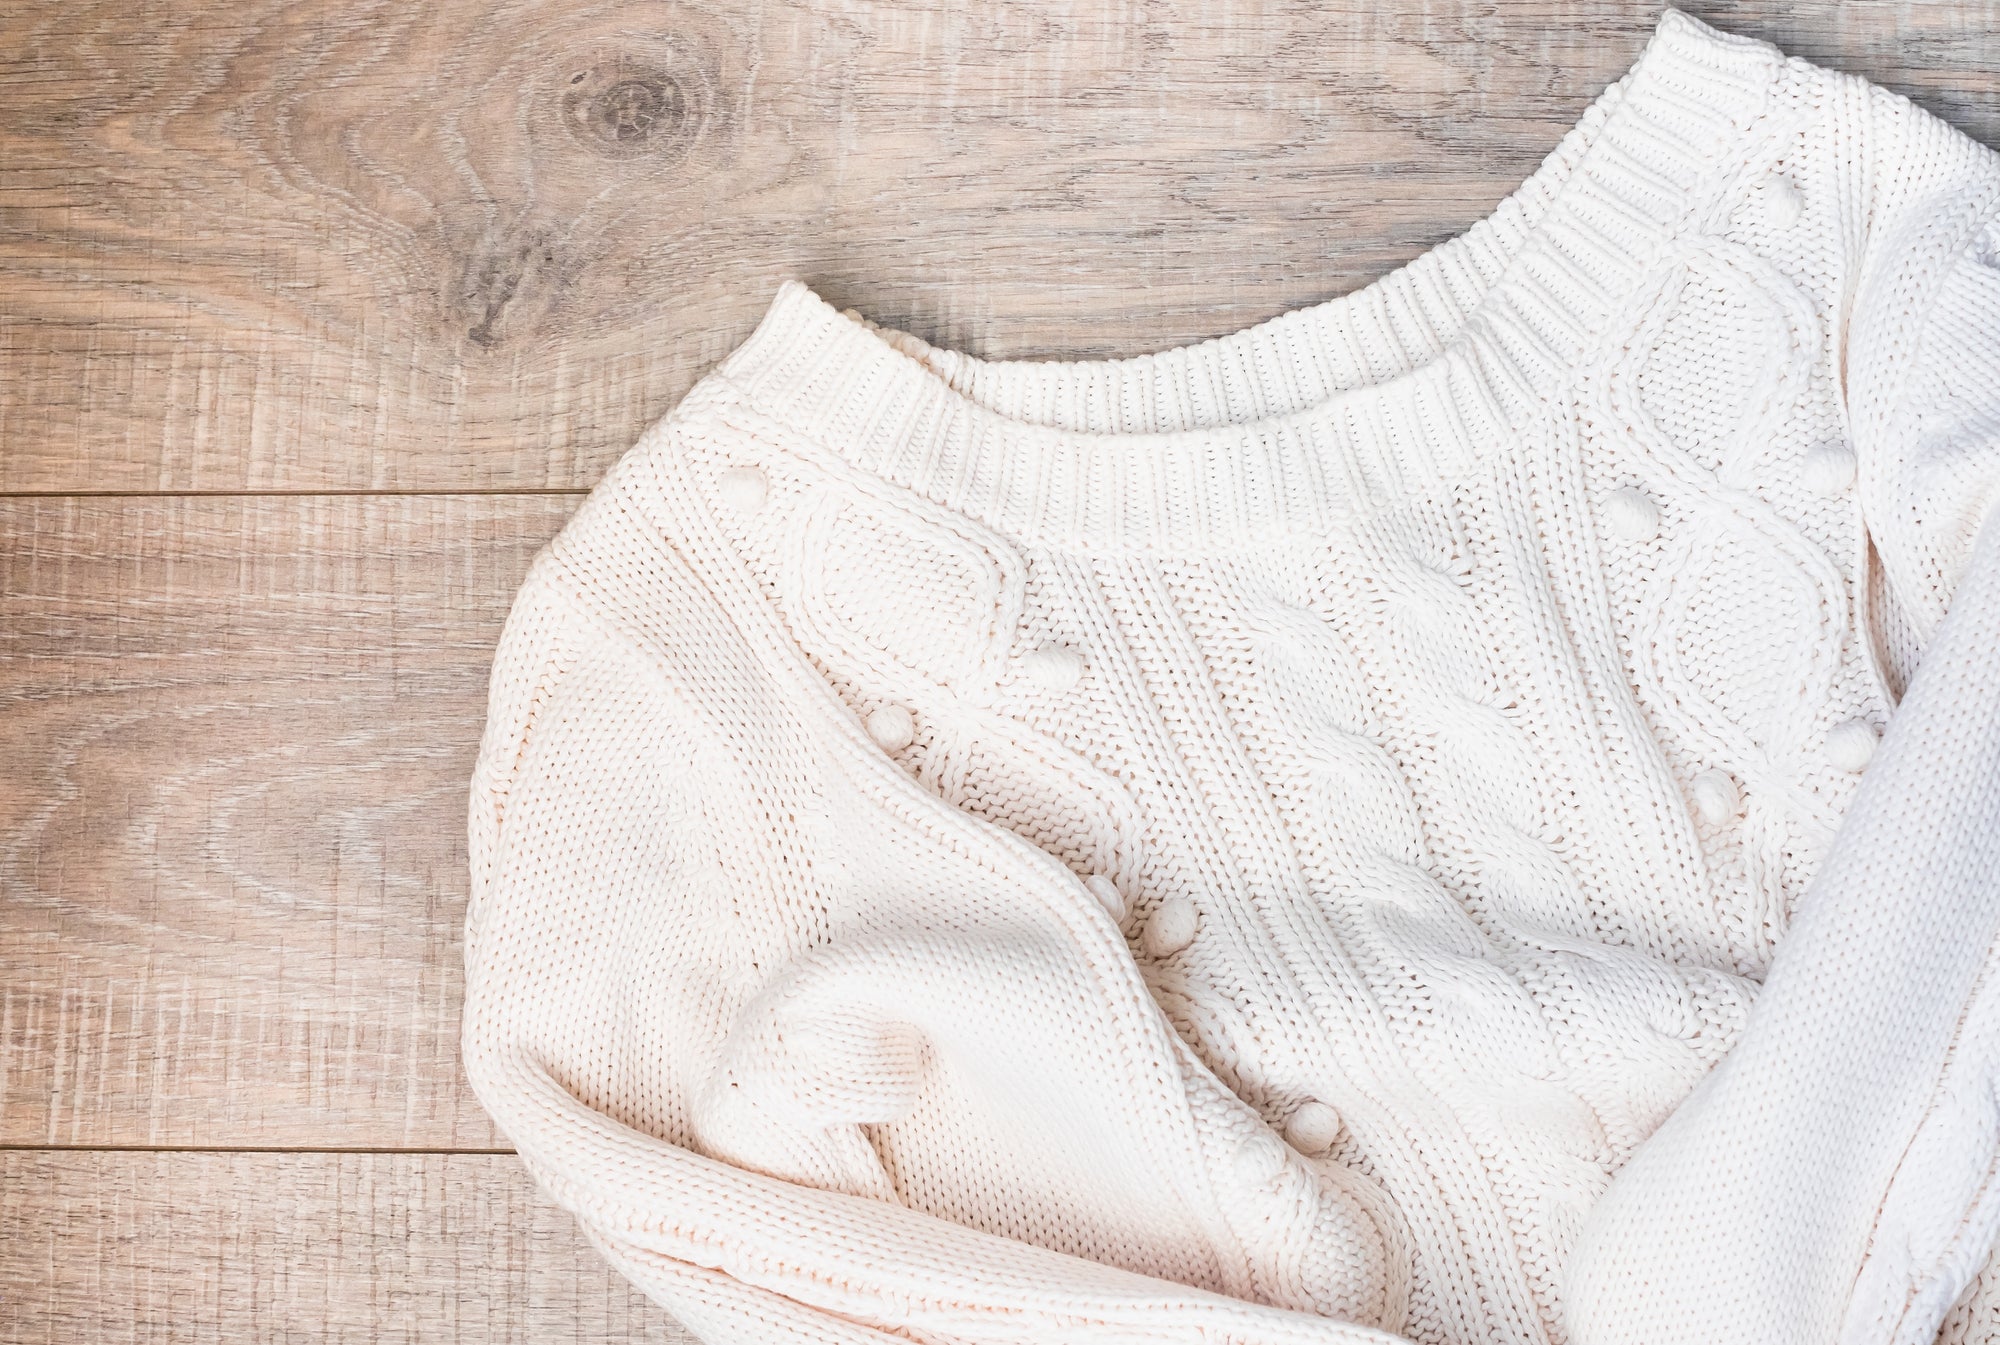 Can You Cut Knit Sweaters?